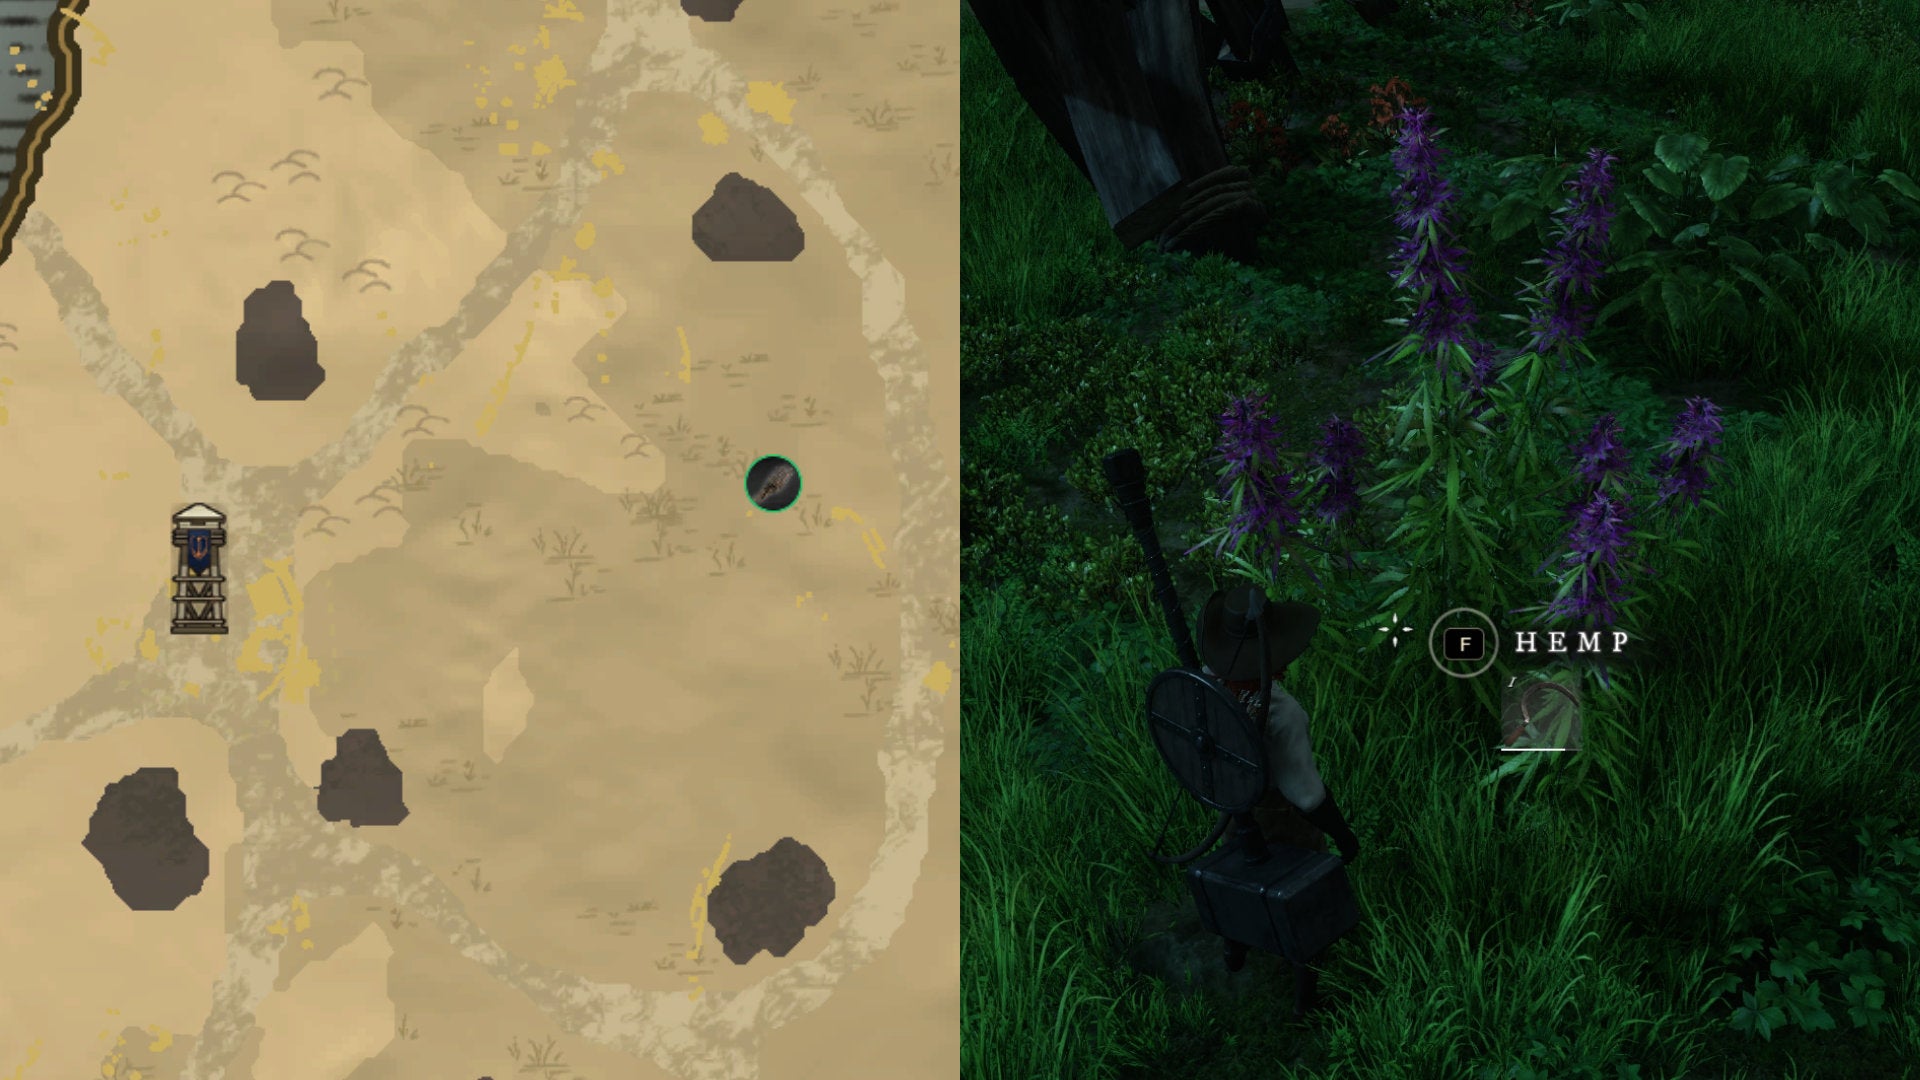 Left: part of the New World map showing the location of Hemp next to Monarch's Bluffs Watchtower. Right: a close-up of the Hemp in-game.